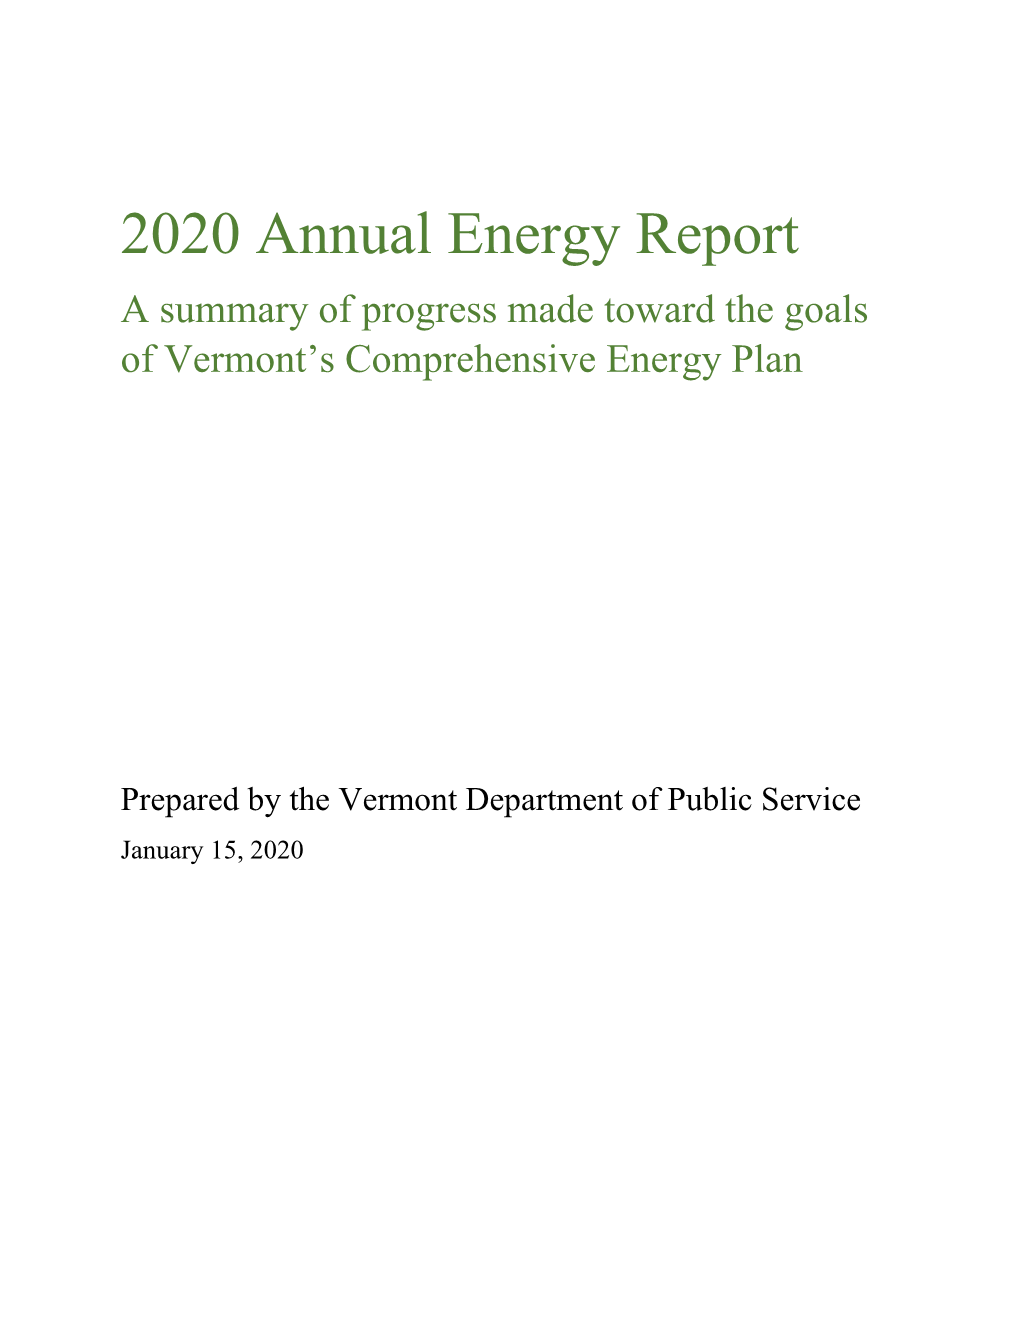 2020 Annual Energy Report a Summary of Progress Made Toward the Goals of Vermont’S Comprehensive Energy Plan